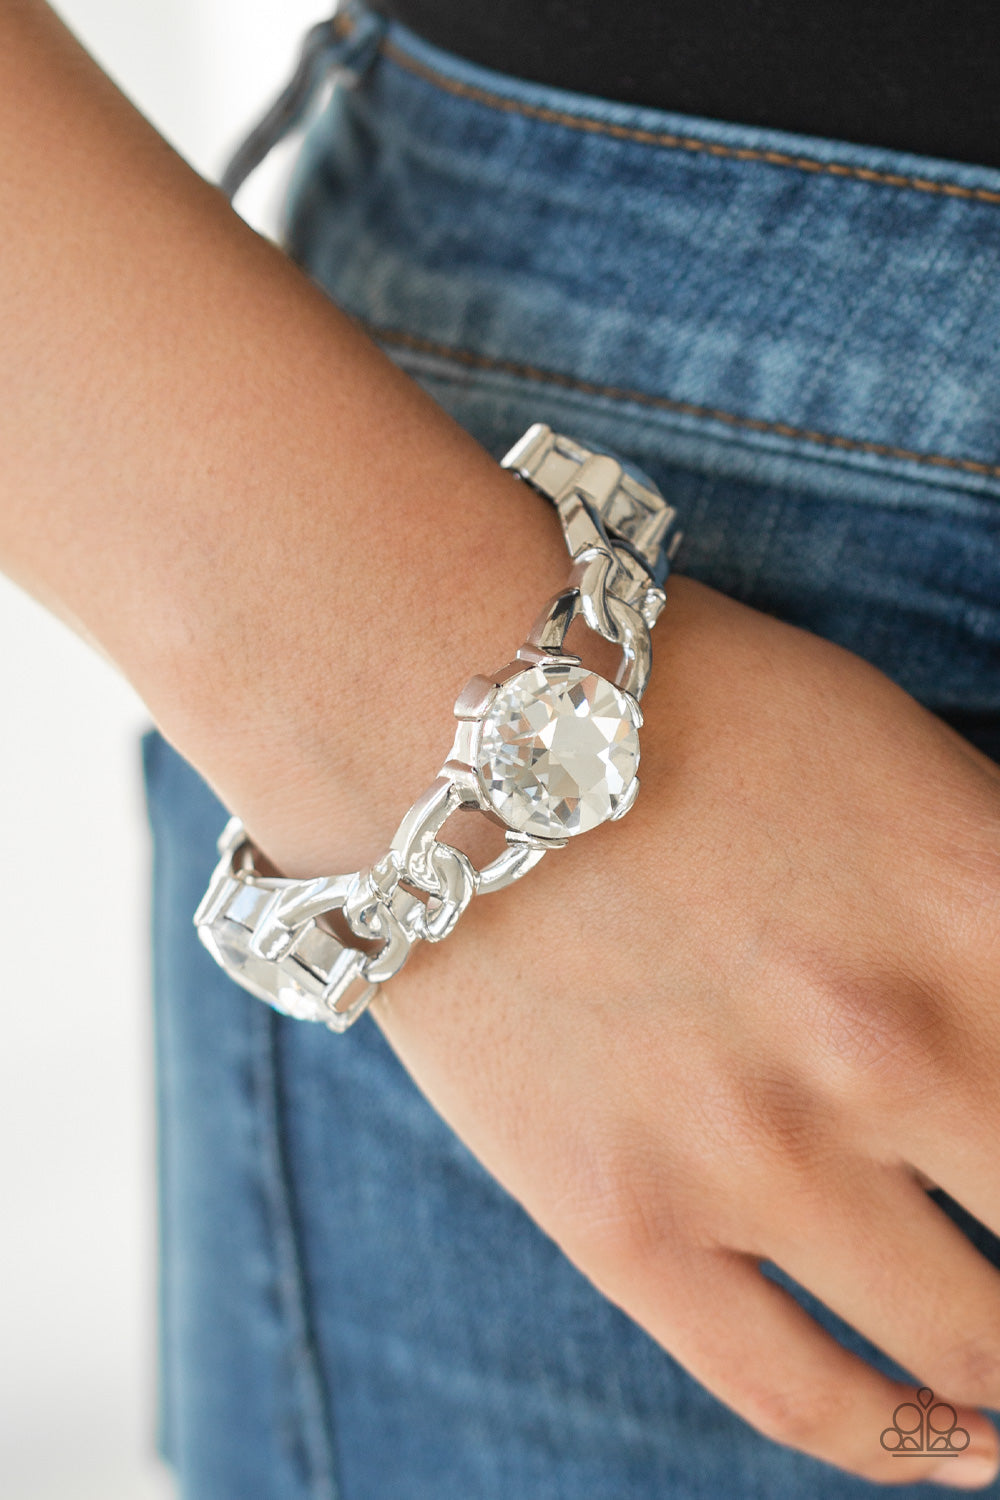 Paparazzi Light Up The Room - White Gem - Silver Chain Link - Stretchy Band Bracelet - $5 Jewelry with Ashley Swint